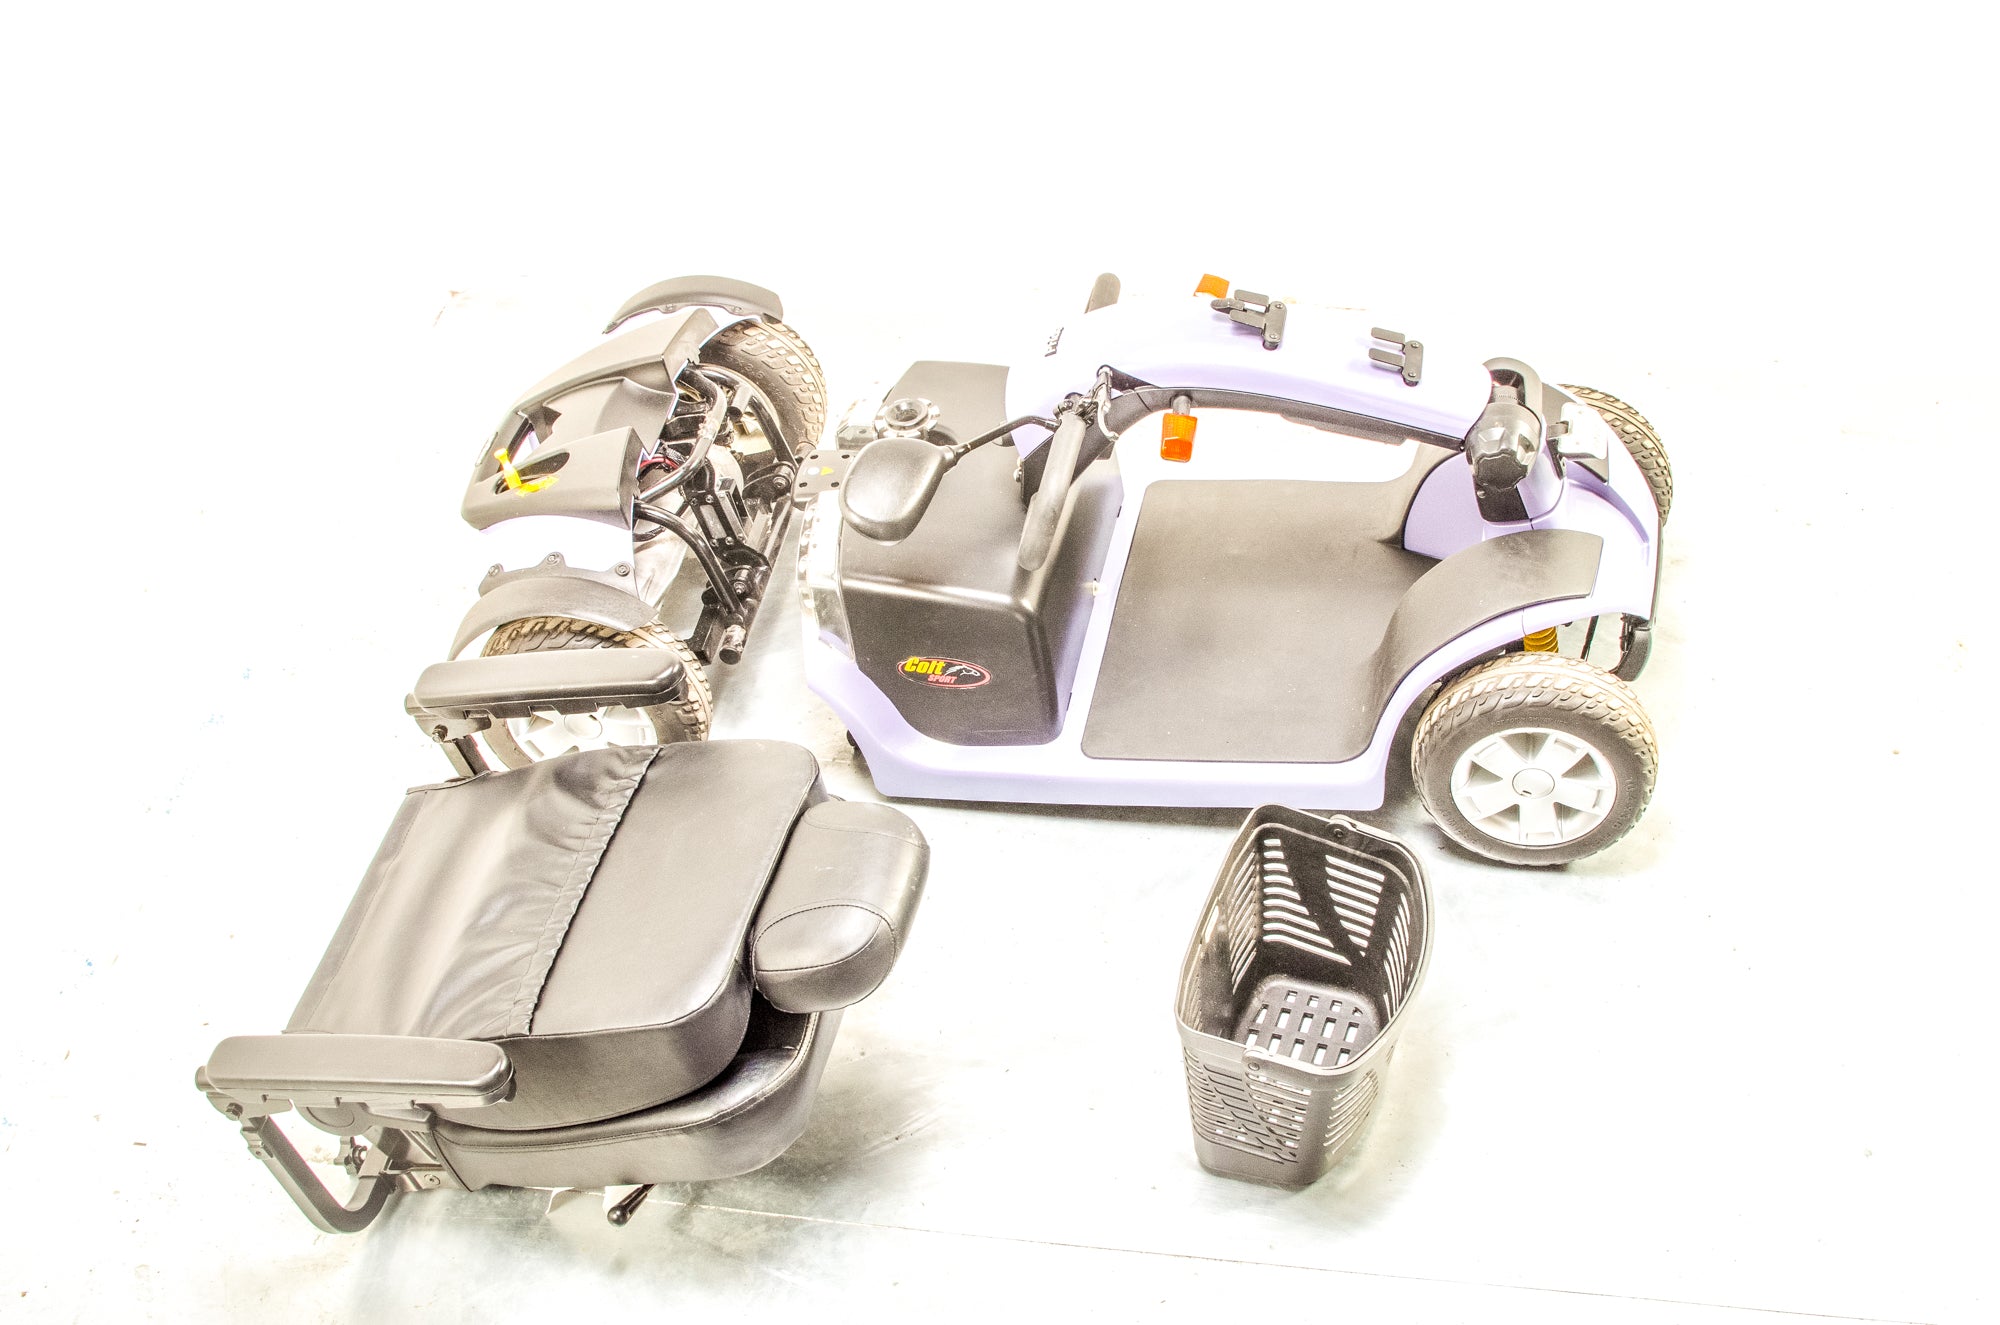 Pride Colt Sport Used Electric Mobility Scooter 8mph Transportable Road Pavement Suspension Lilac